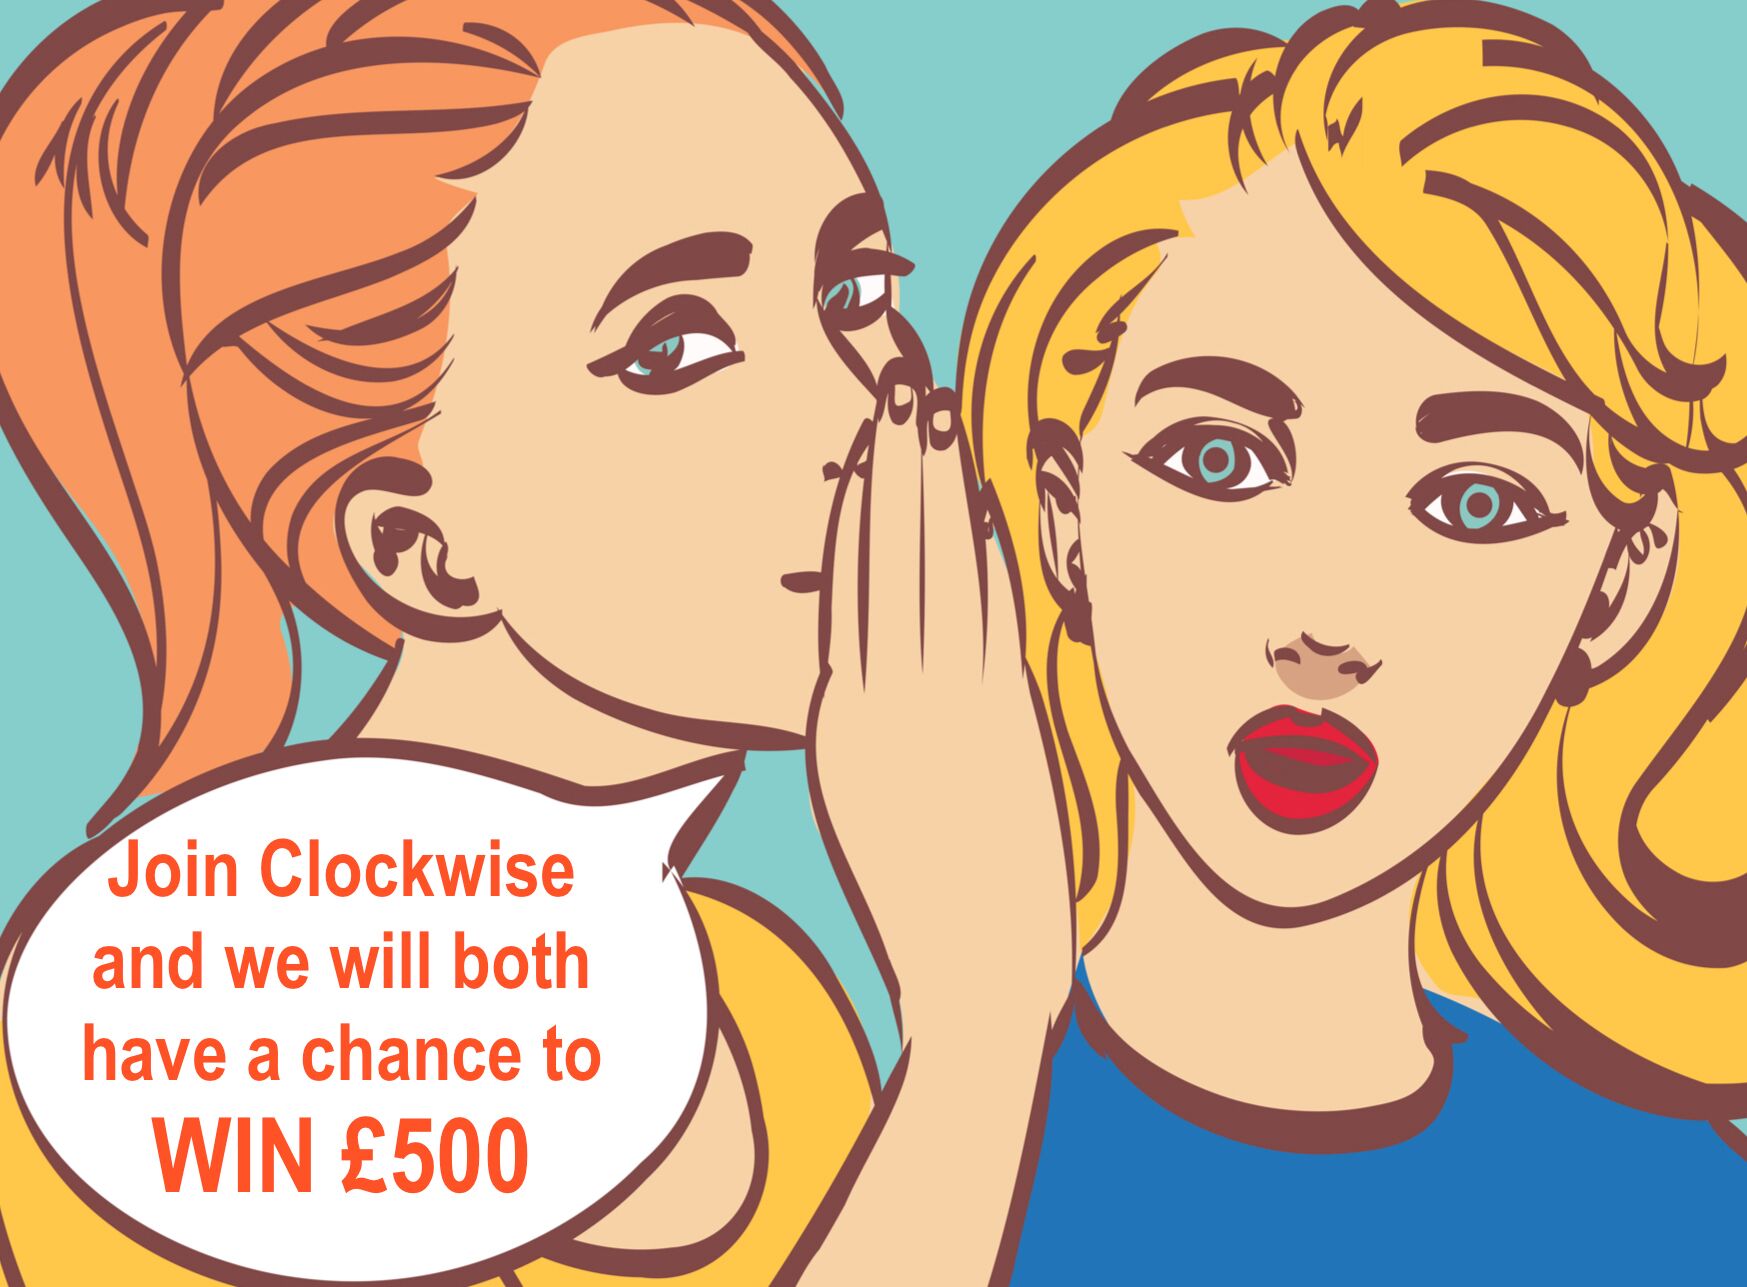 You Could WIN £500 If You Refer A Friend